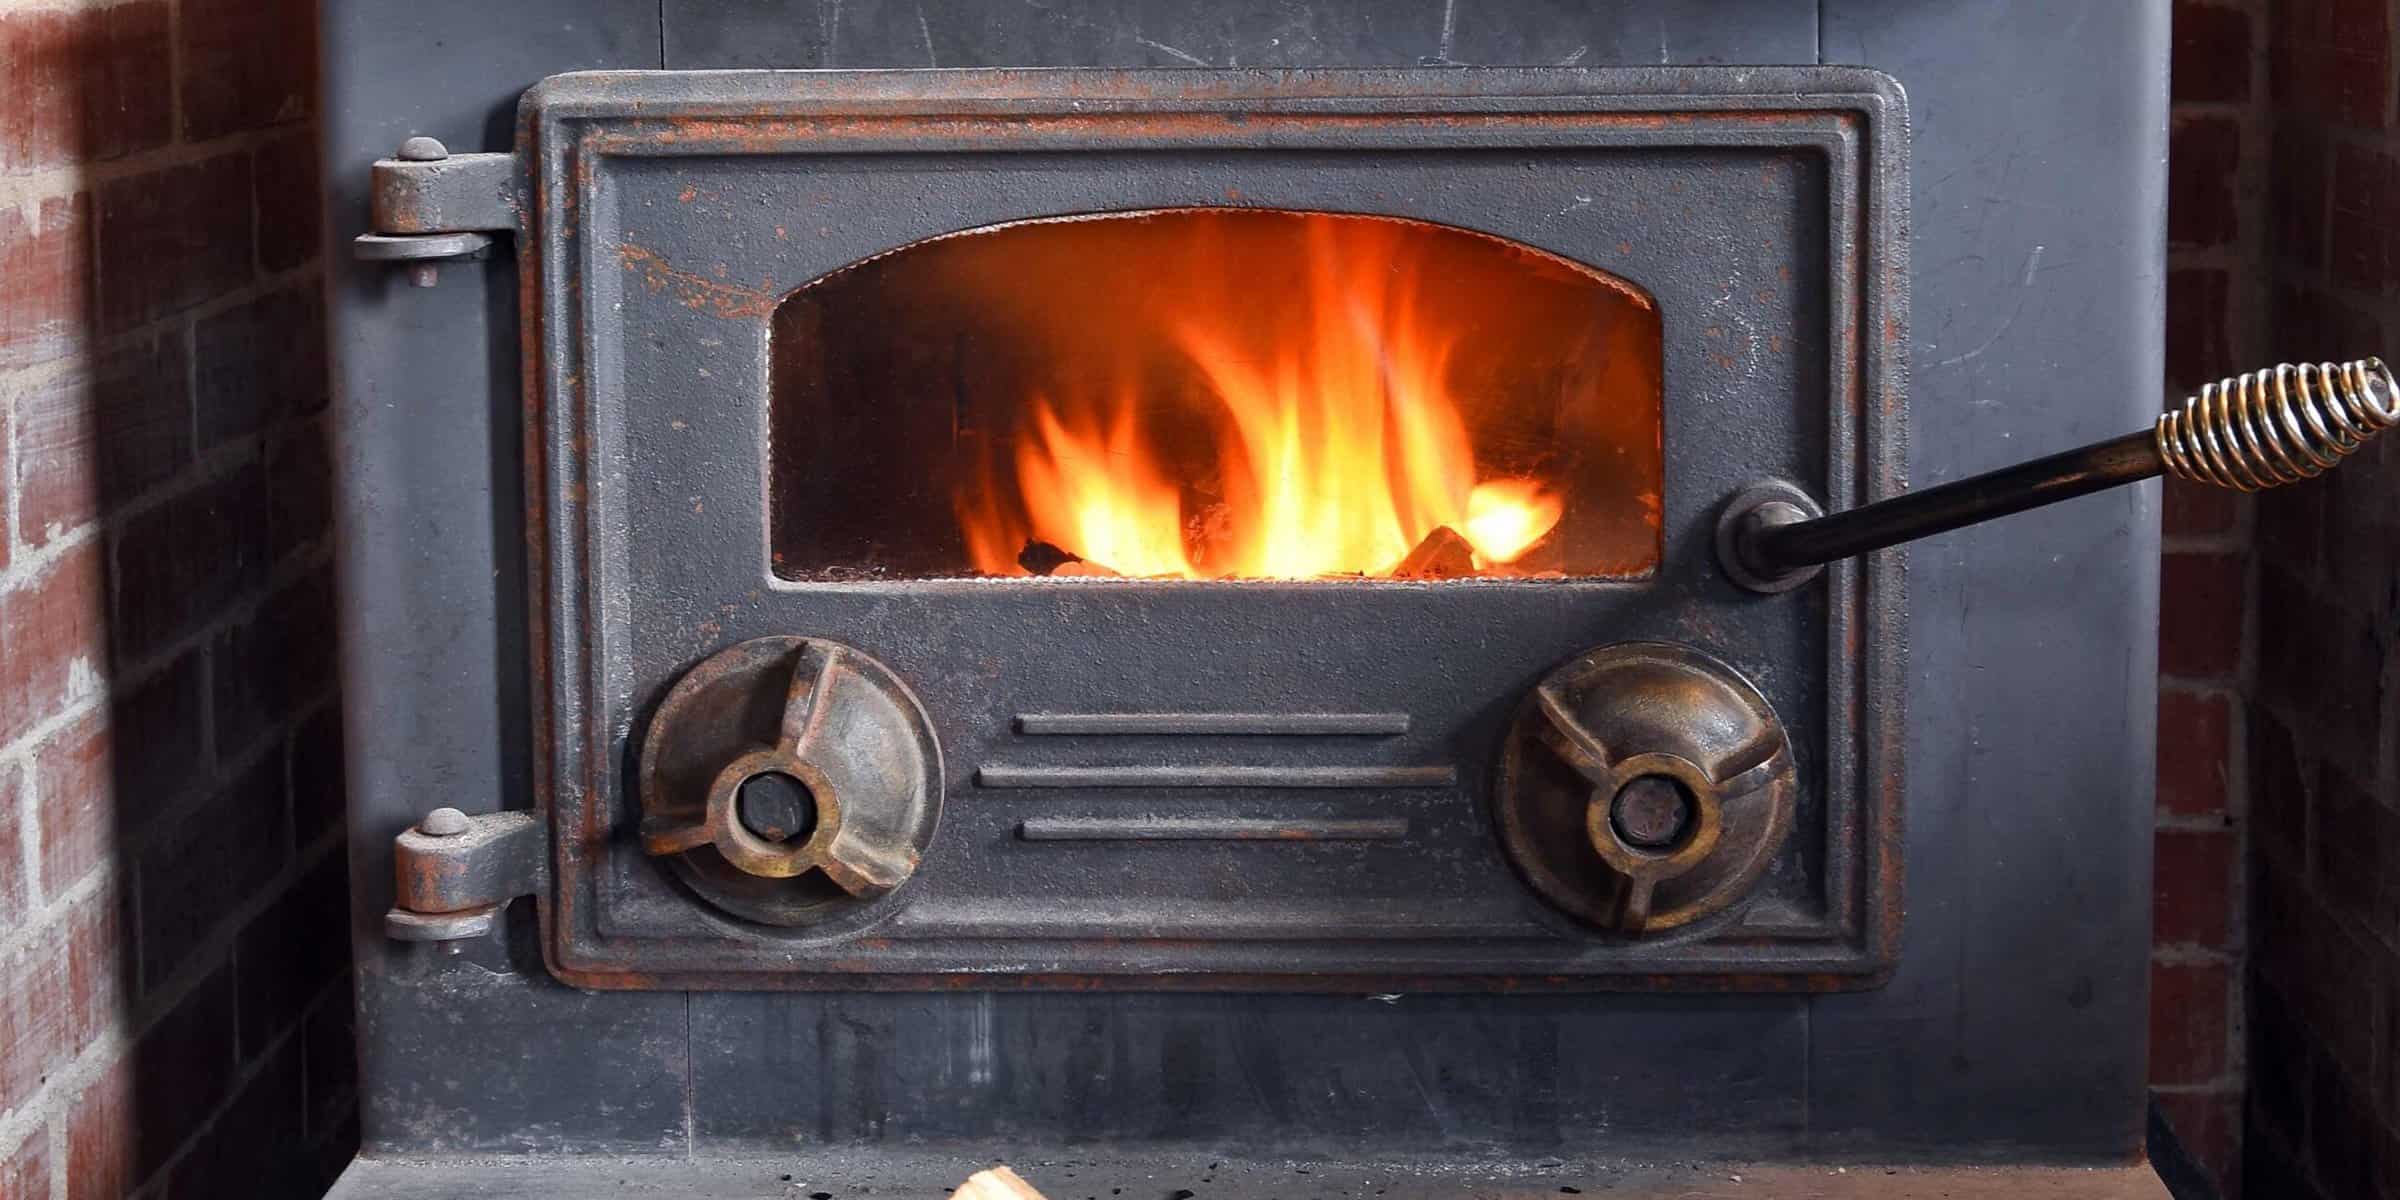 How To Clean Wood Stove Glass